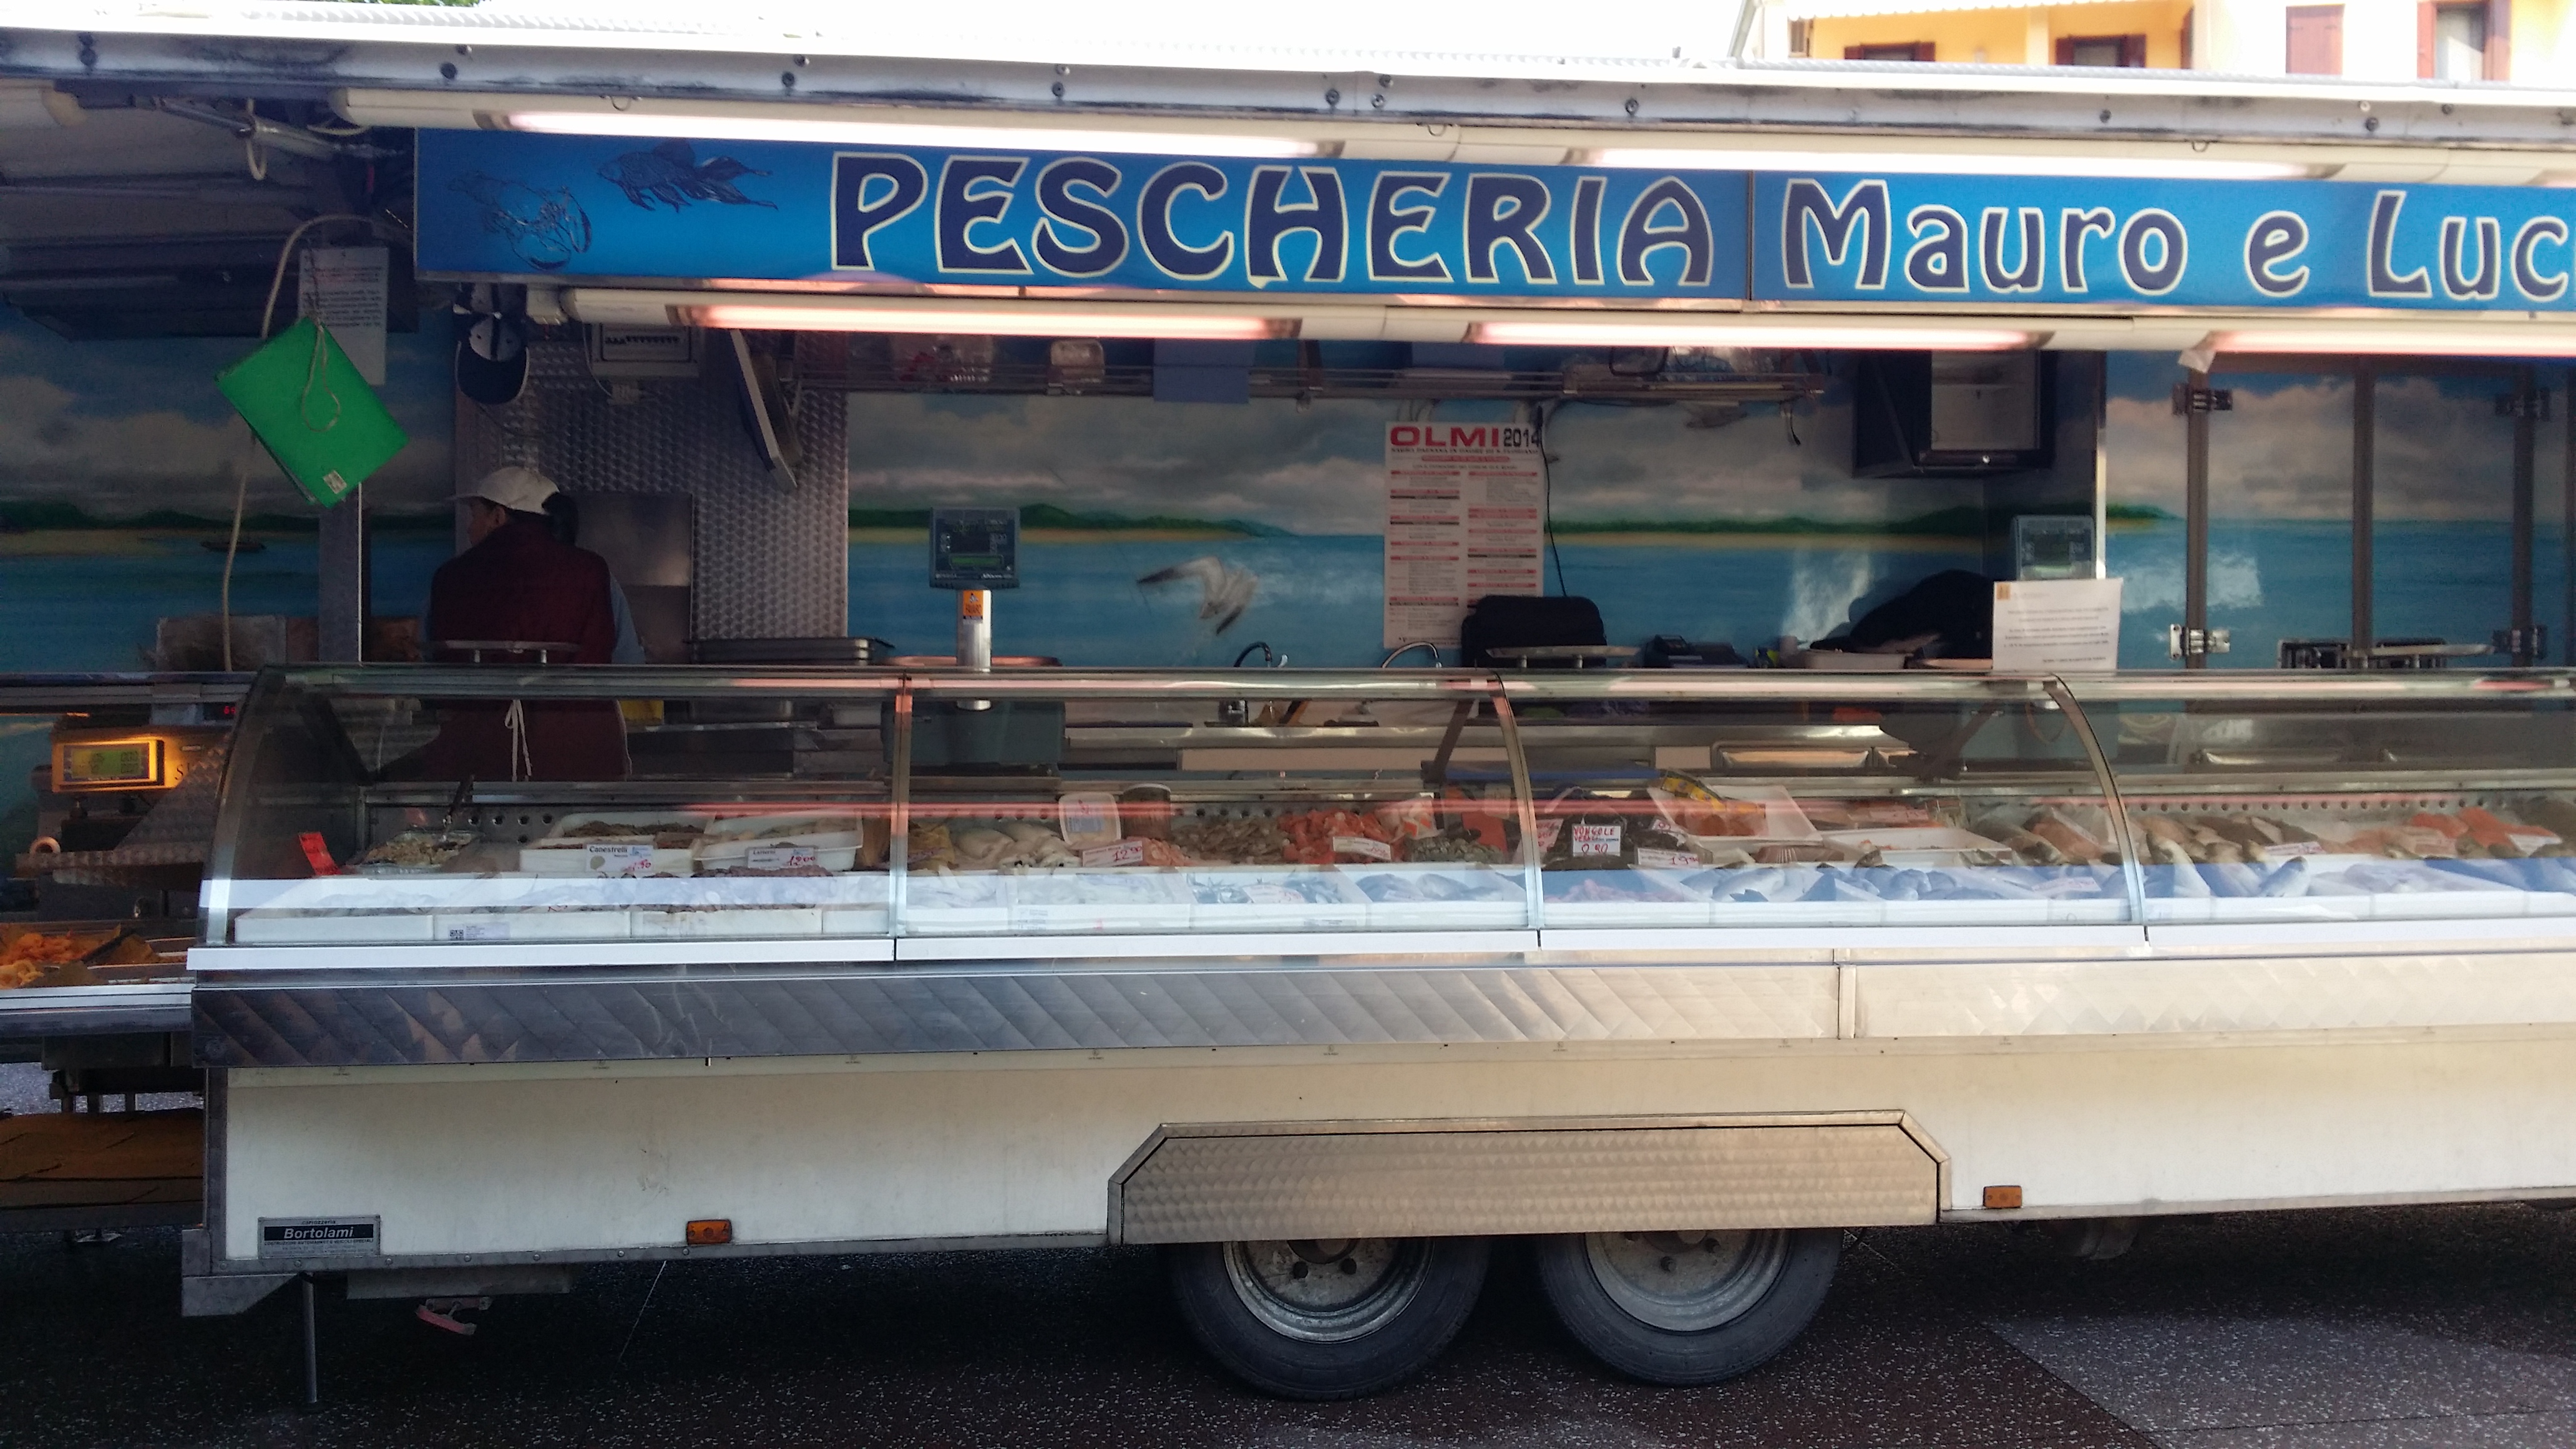 Mobile vending stall for fish products and cooked items